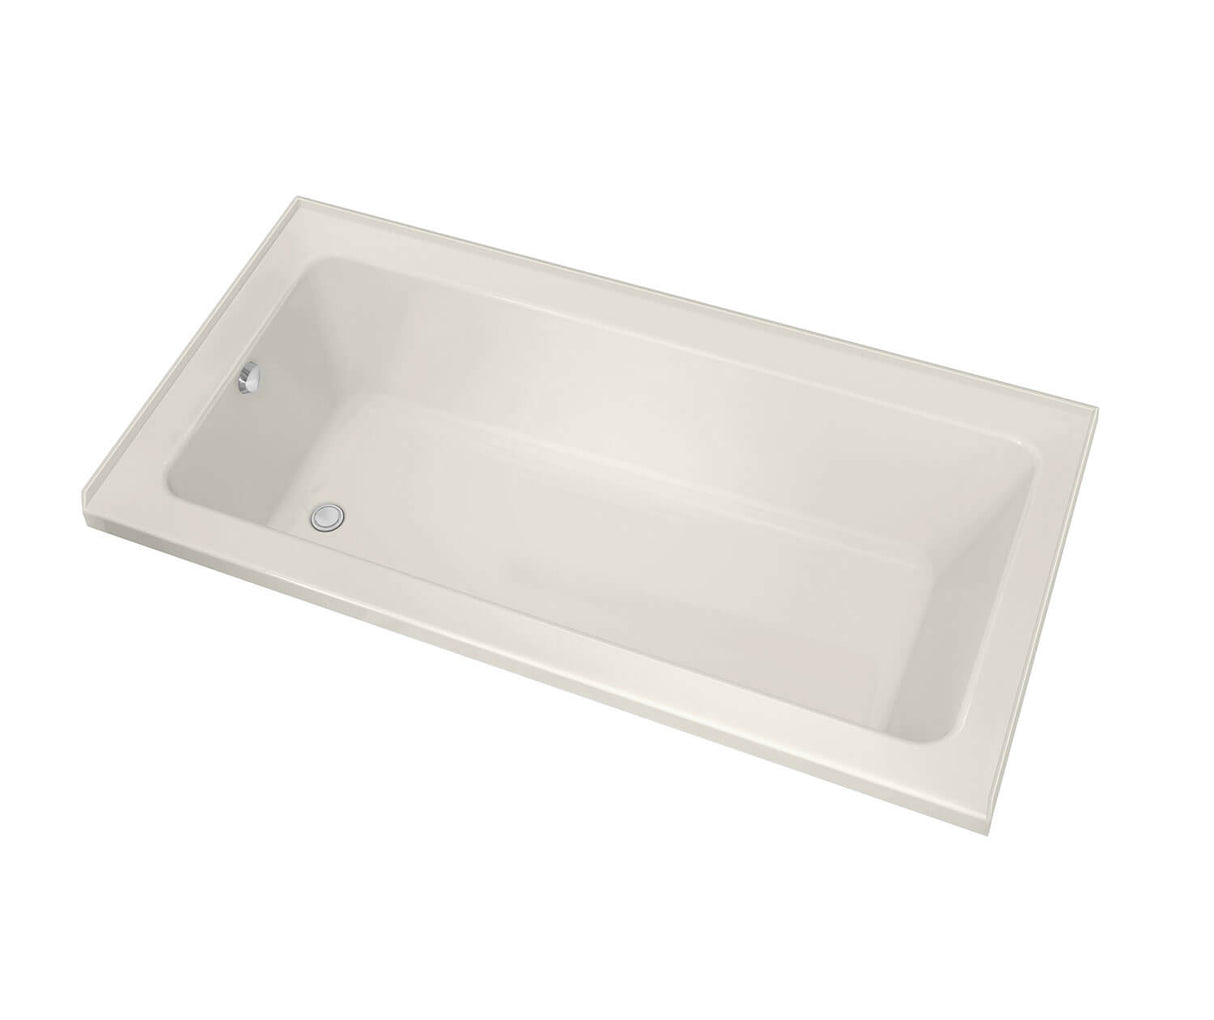 MAAX 106390-L-107-007 Skybox 6636 IF Acrylic Alcove Left-Hand Drain Hydrosens Bathtub in Biscuit